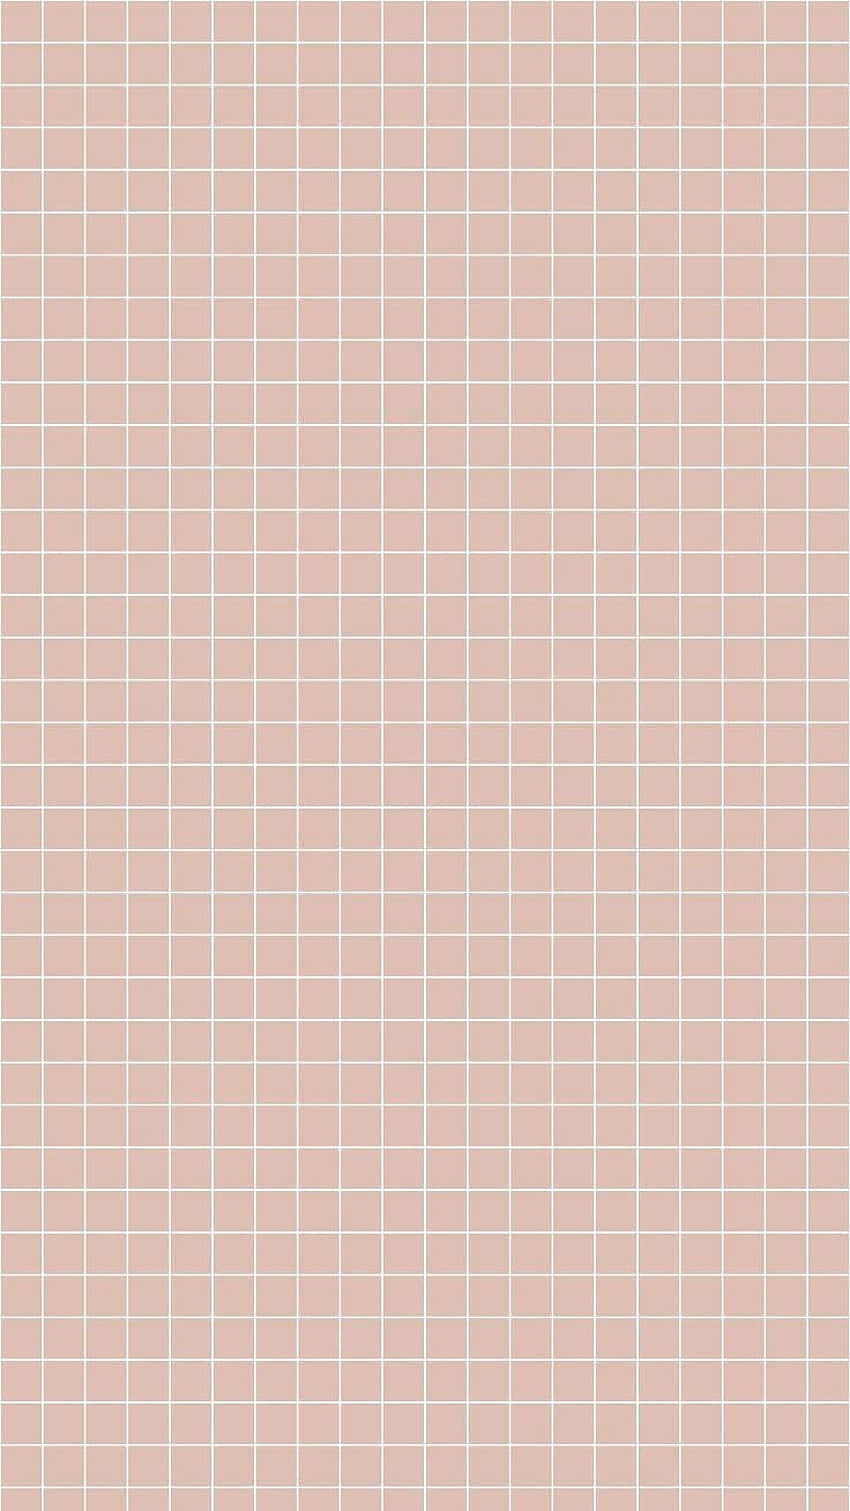 A Pink And White Checkered Pattern Wallpaper